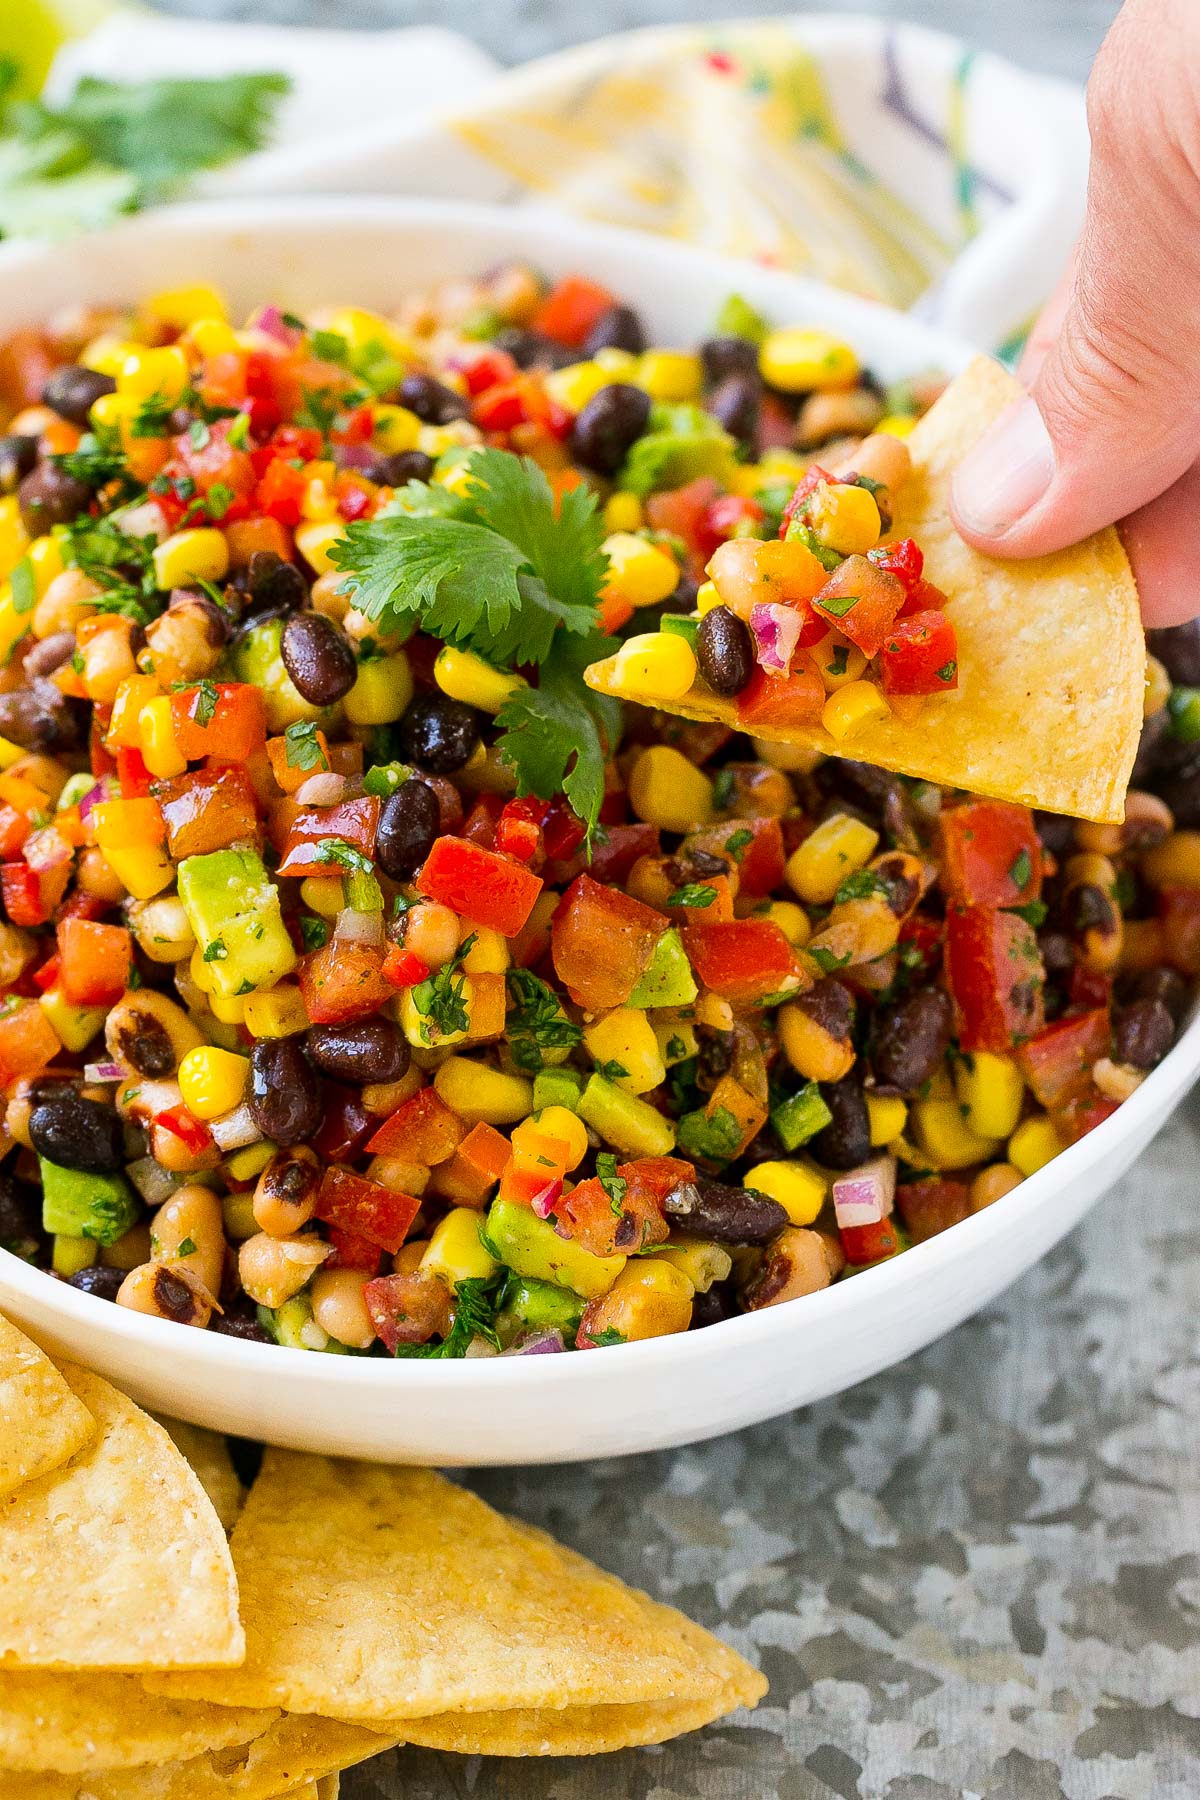 A hand scooping up Texas caviar on a chip.